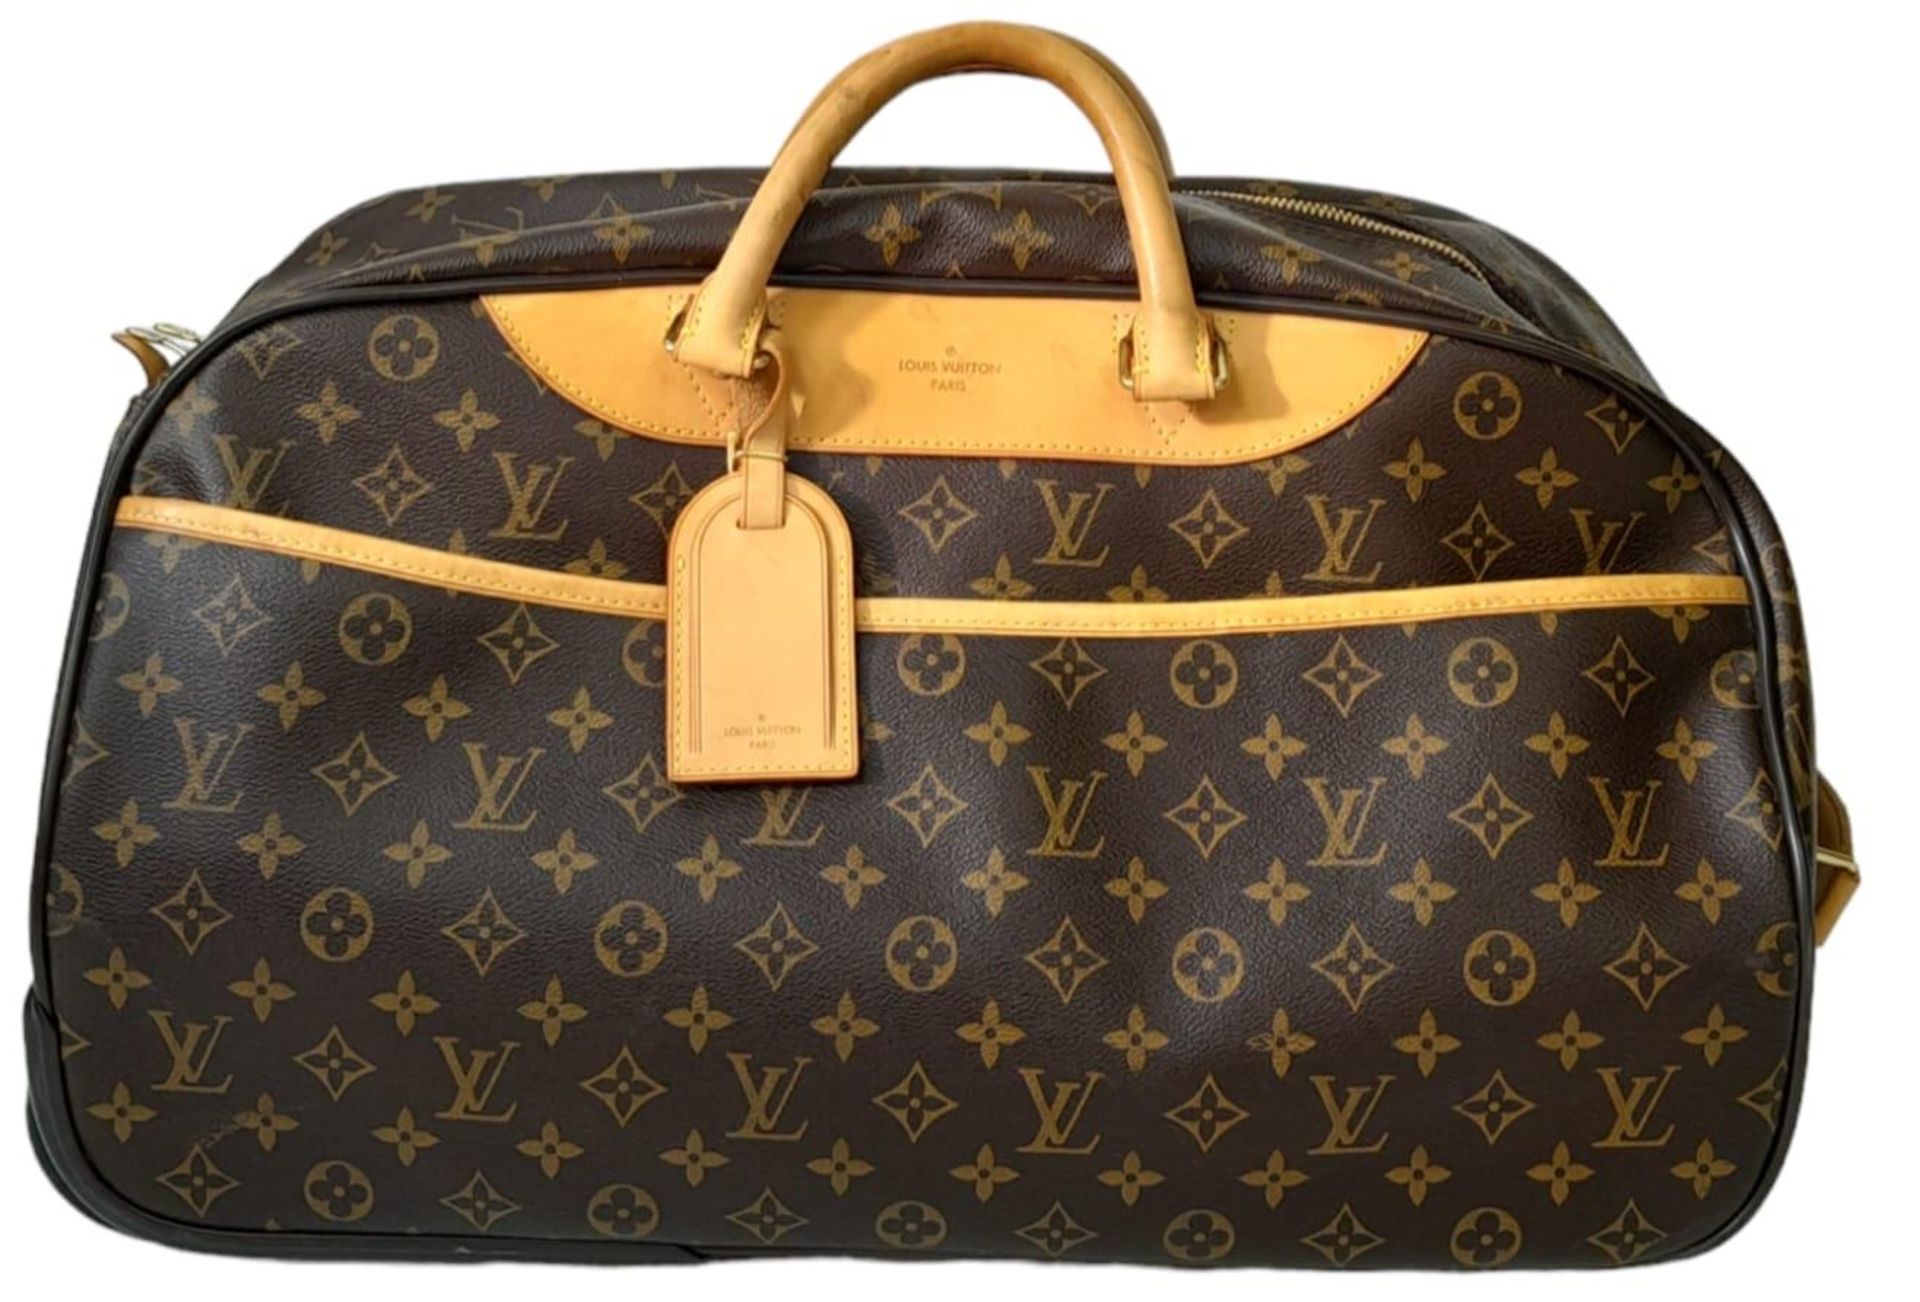 A Louis Vuitton Monogram Eole Convertible Travel Bag. Leather exterior with gold-toned hardware,